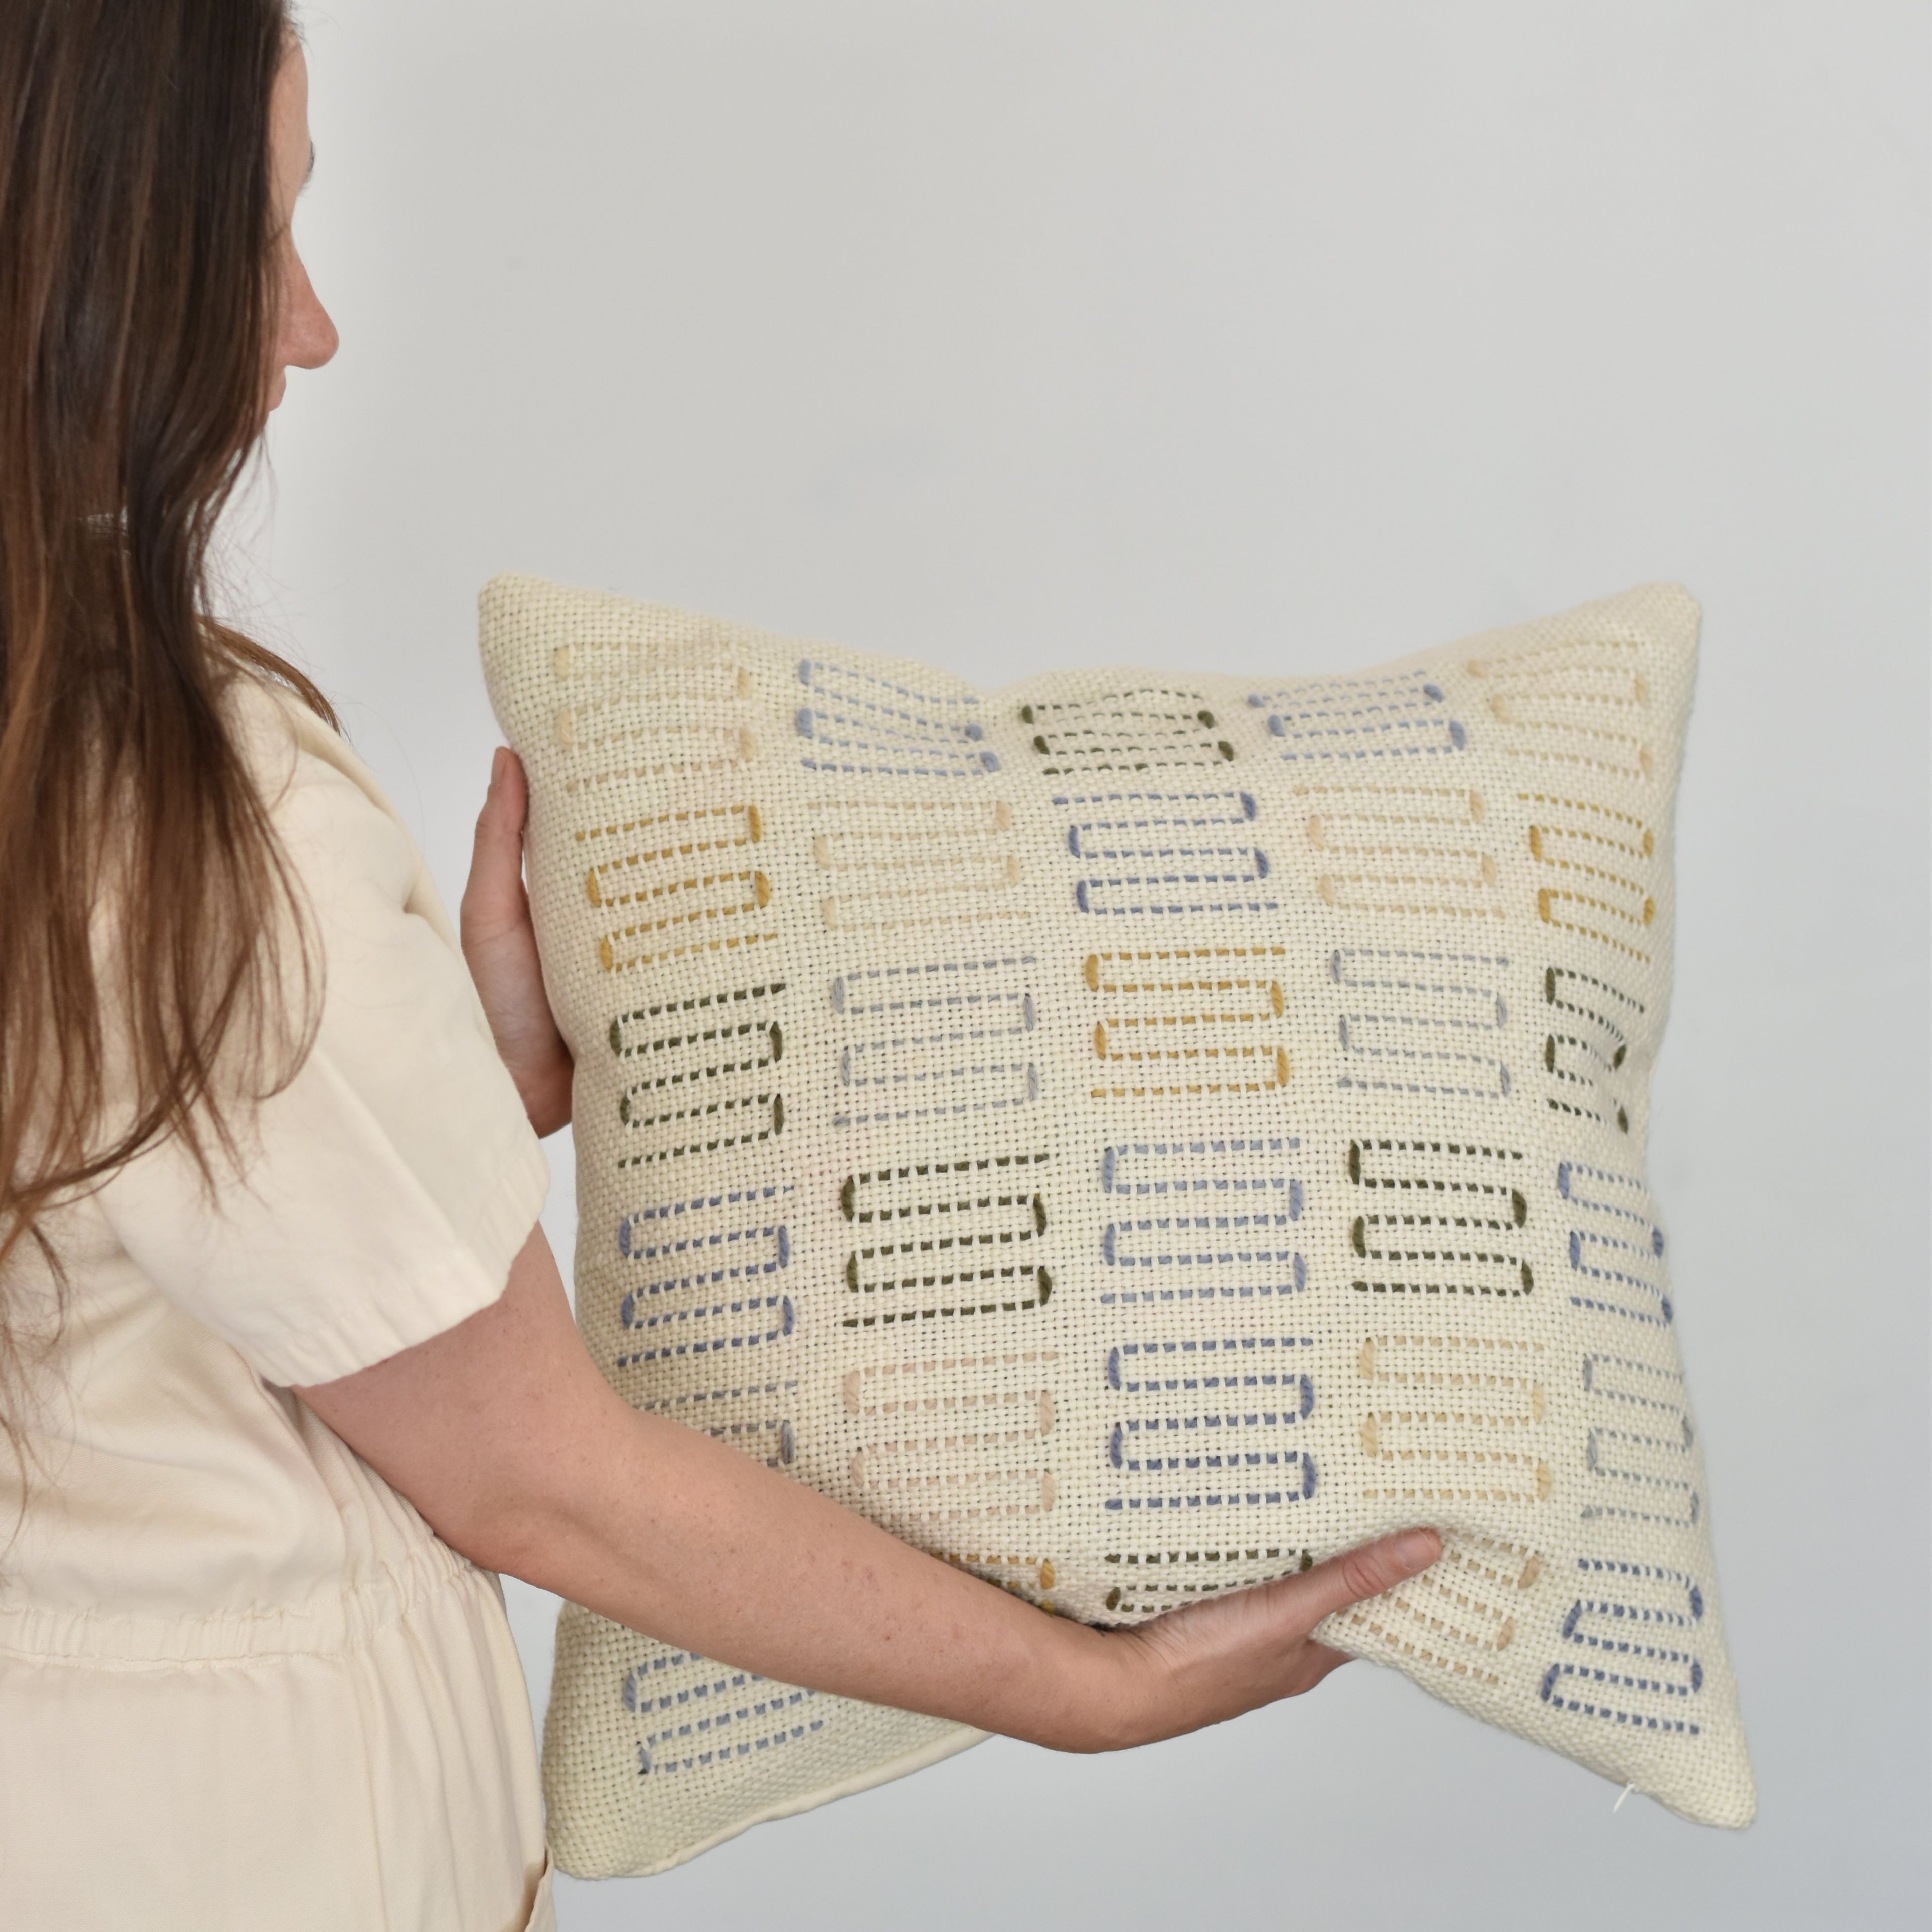 LILA Handwoven Merino Wool Embroidered Cushion Cover